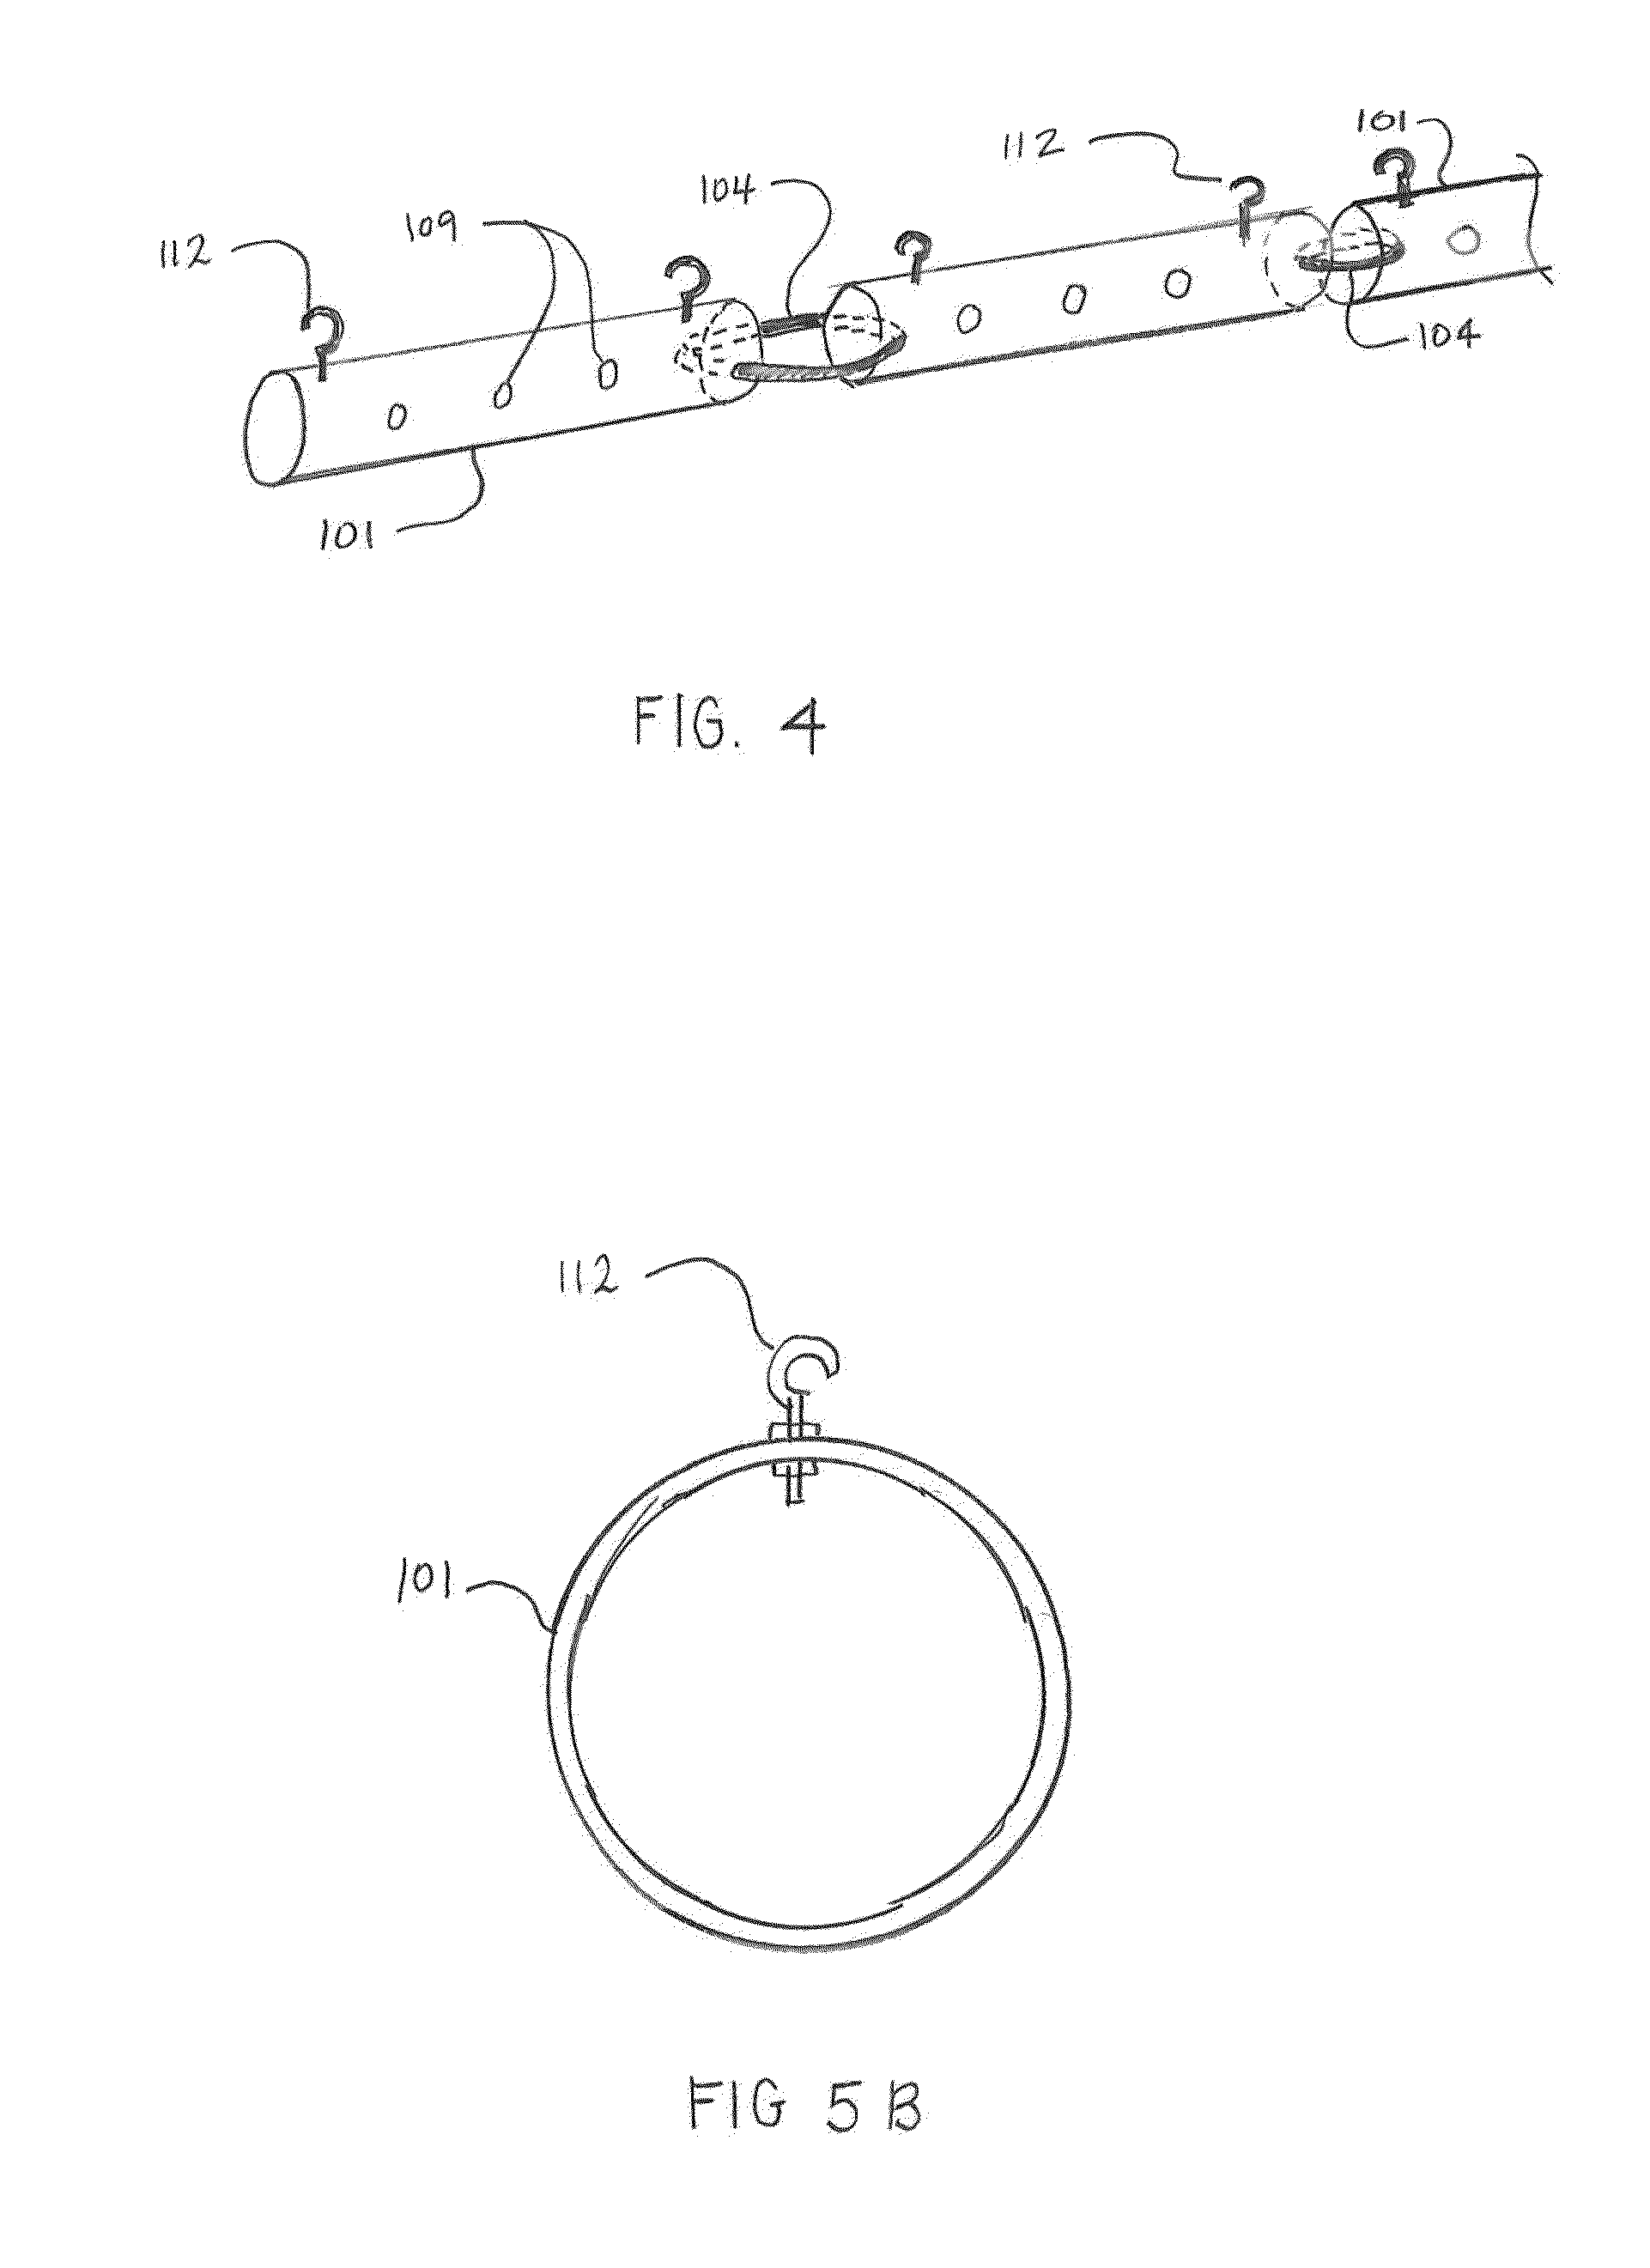 System and Method for Building and Maintaining Stable Sand Beach and Shoreline Profiles and for Controlling Beach or Riparian Erosion